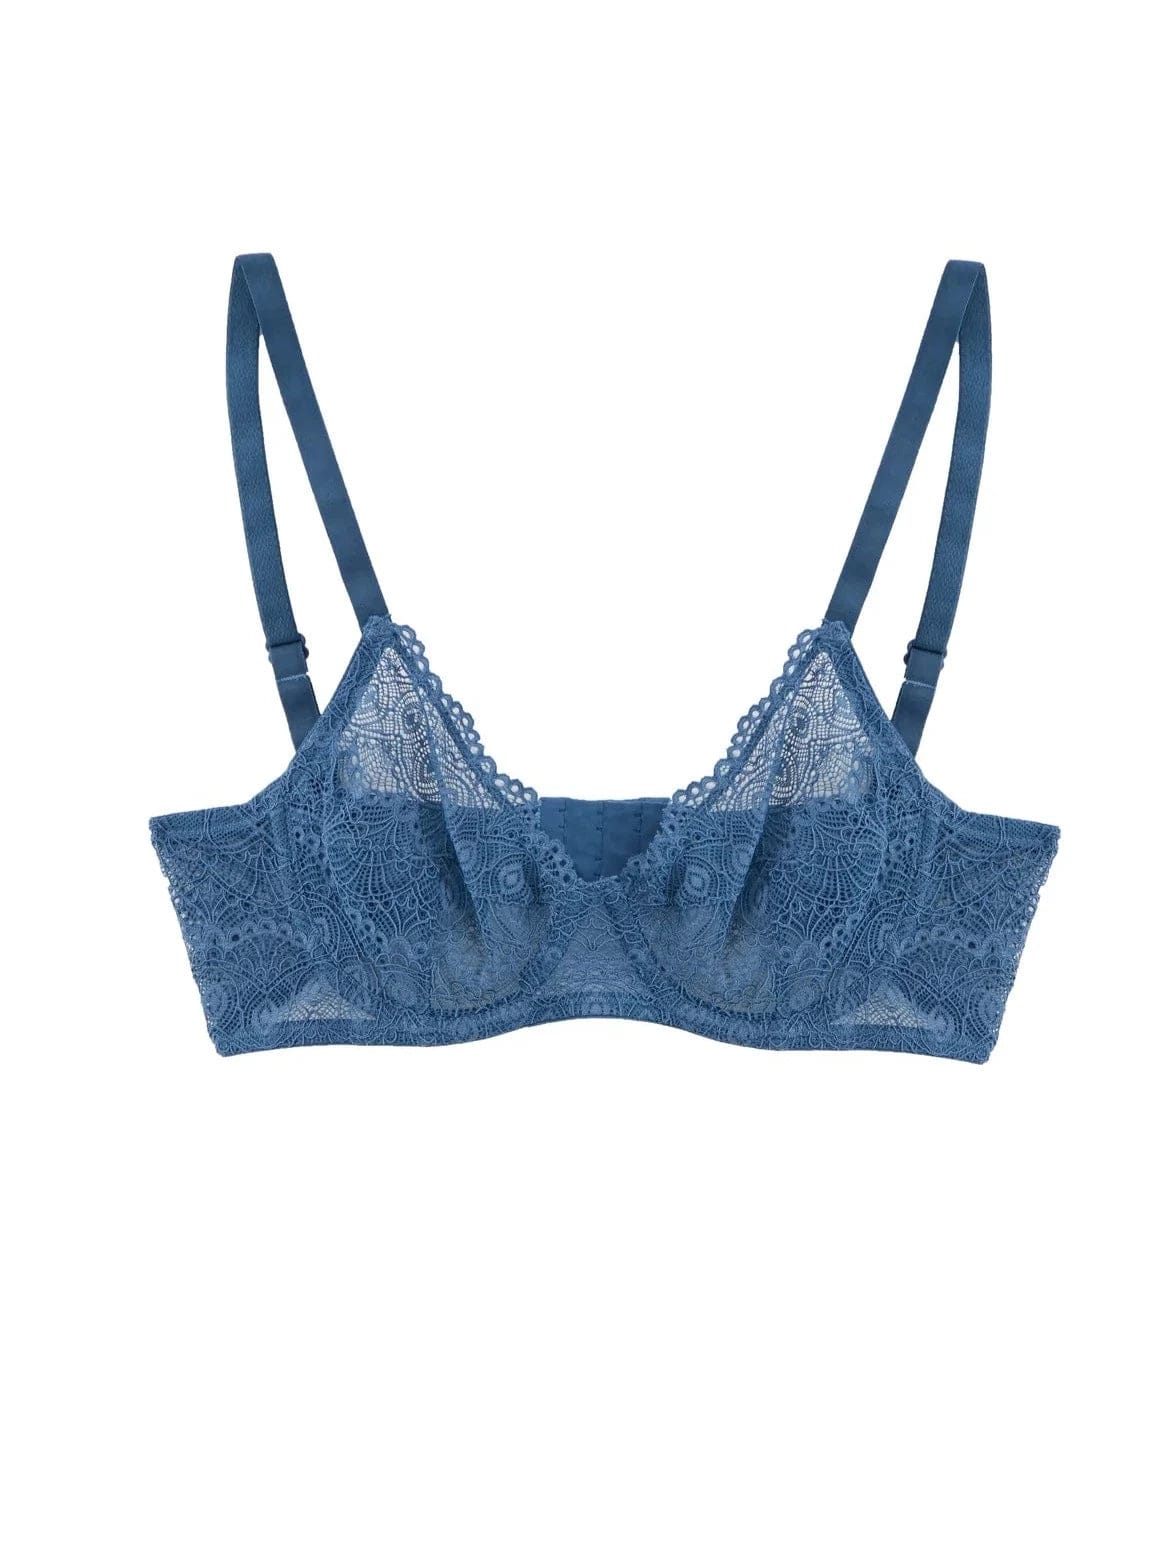 Bloom Bra - Let your curves be celebrated this summer with our